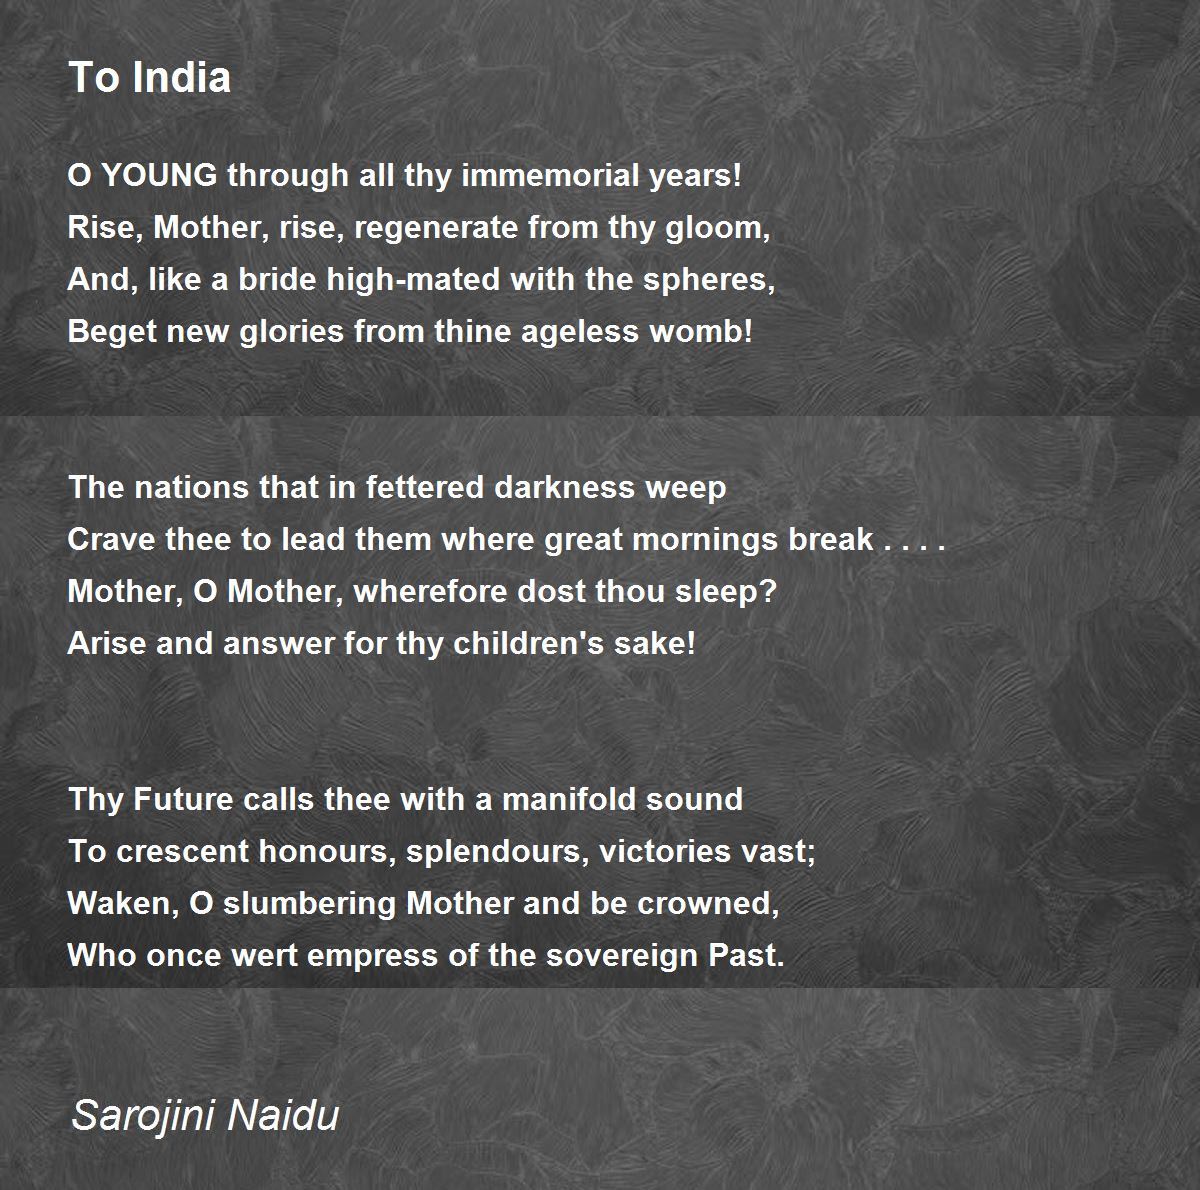 poem on india in english